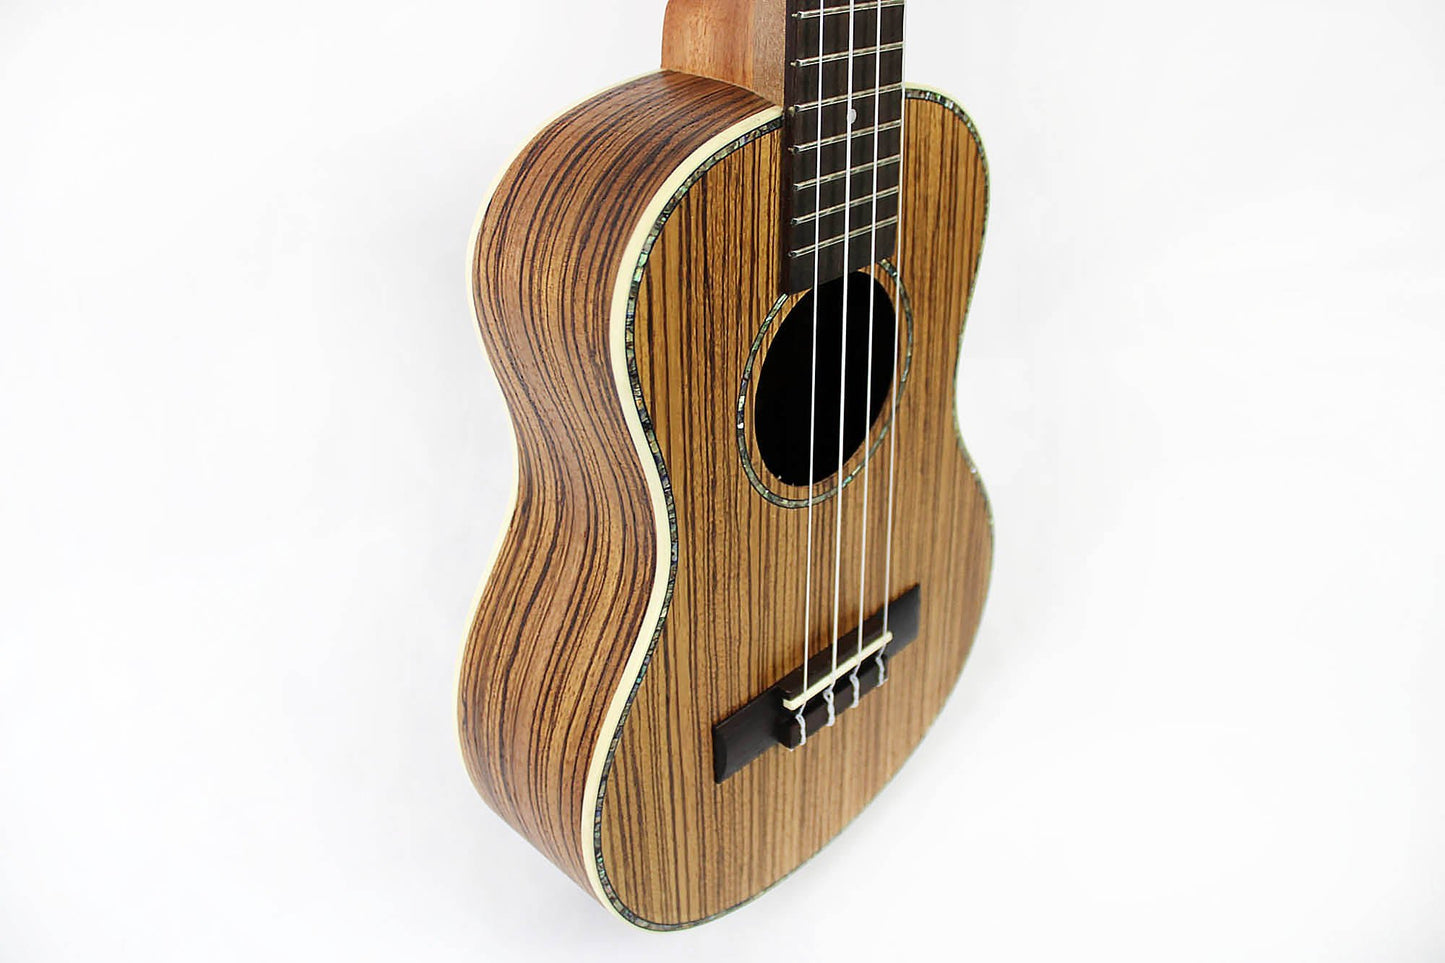 This is the front side view of the top and neck of a Snail SNAILZEBUKT Zebrawood Tenor Ukulele.